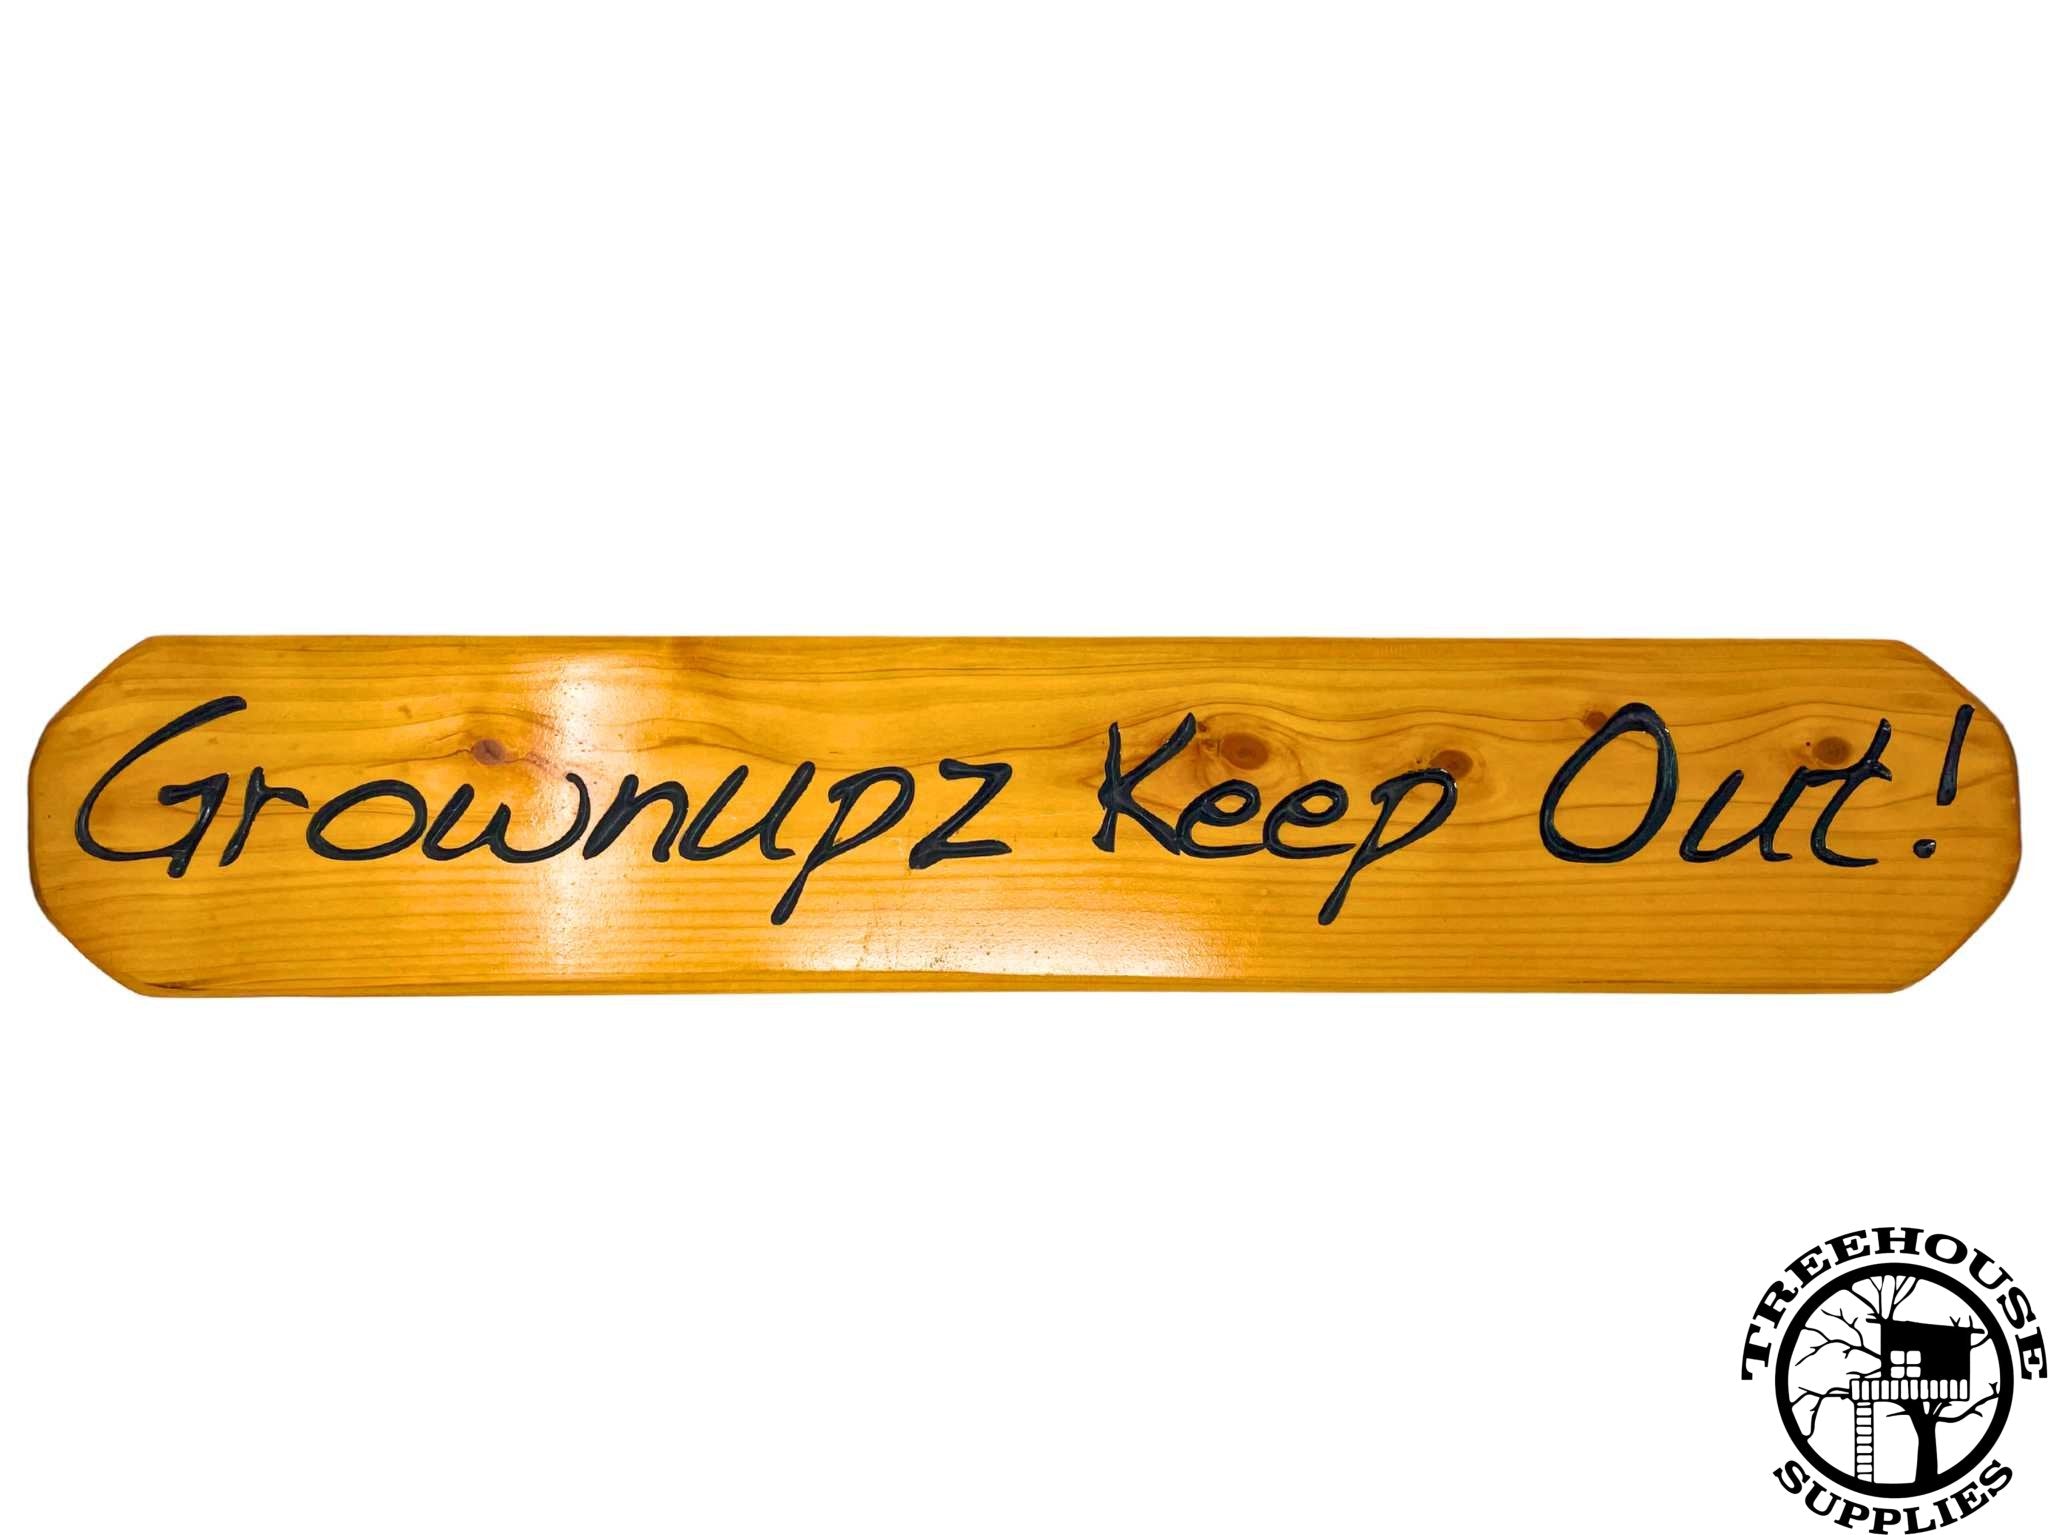 Two-foot-long wooden sign with lettering. Engraved or carved text states Grownupz Keep Out! White Background. 